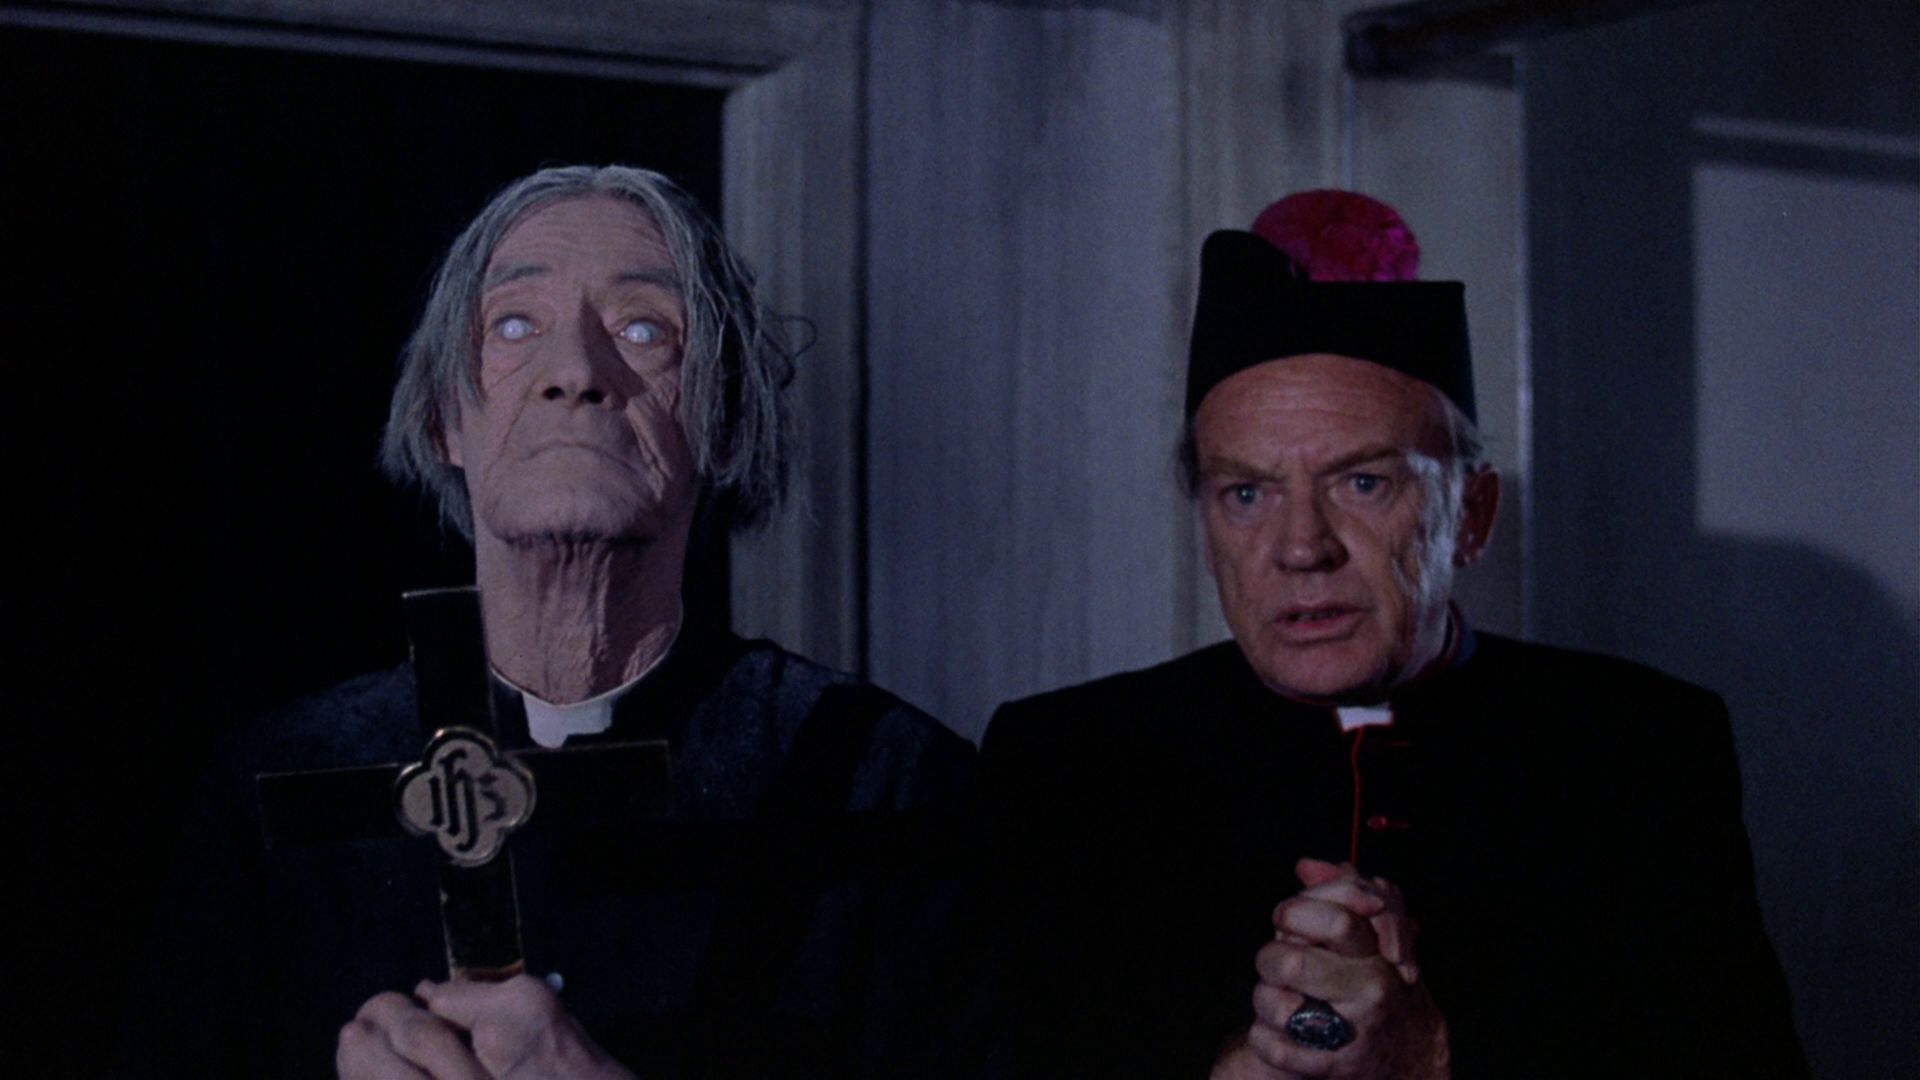 (l to r) John Carradine as Father Halliran, the blind priest on the top floor, and Arthur Kennedy as Monsignor Franchino in The Sentinel (1977)